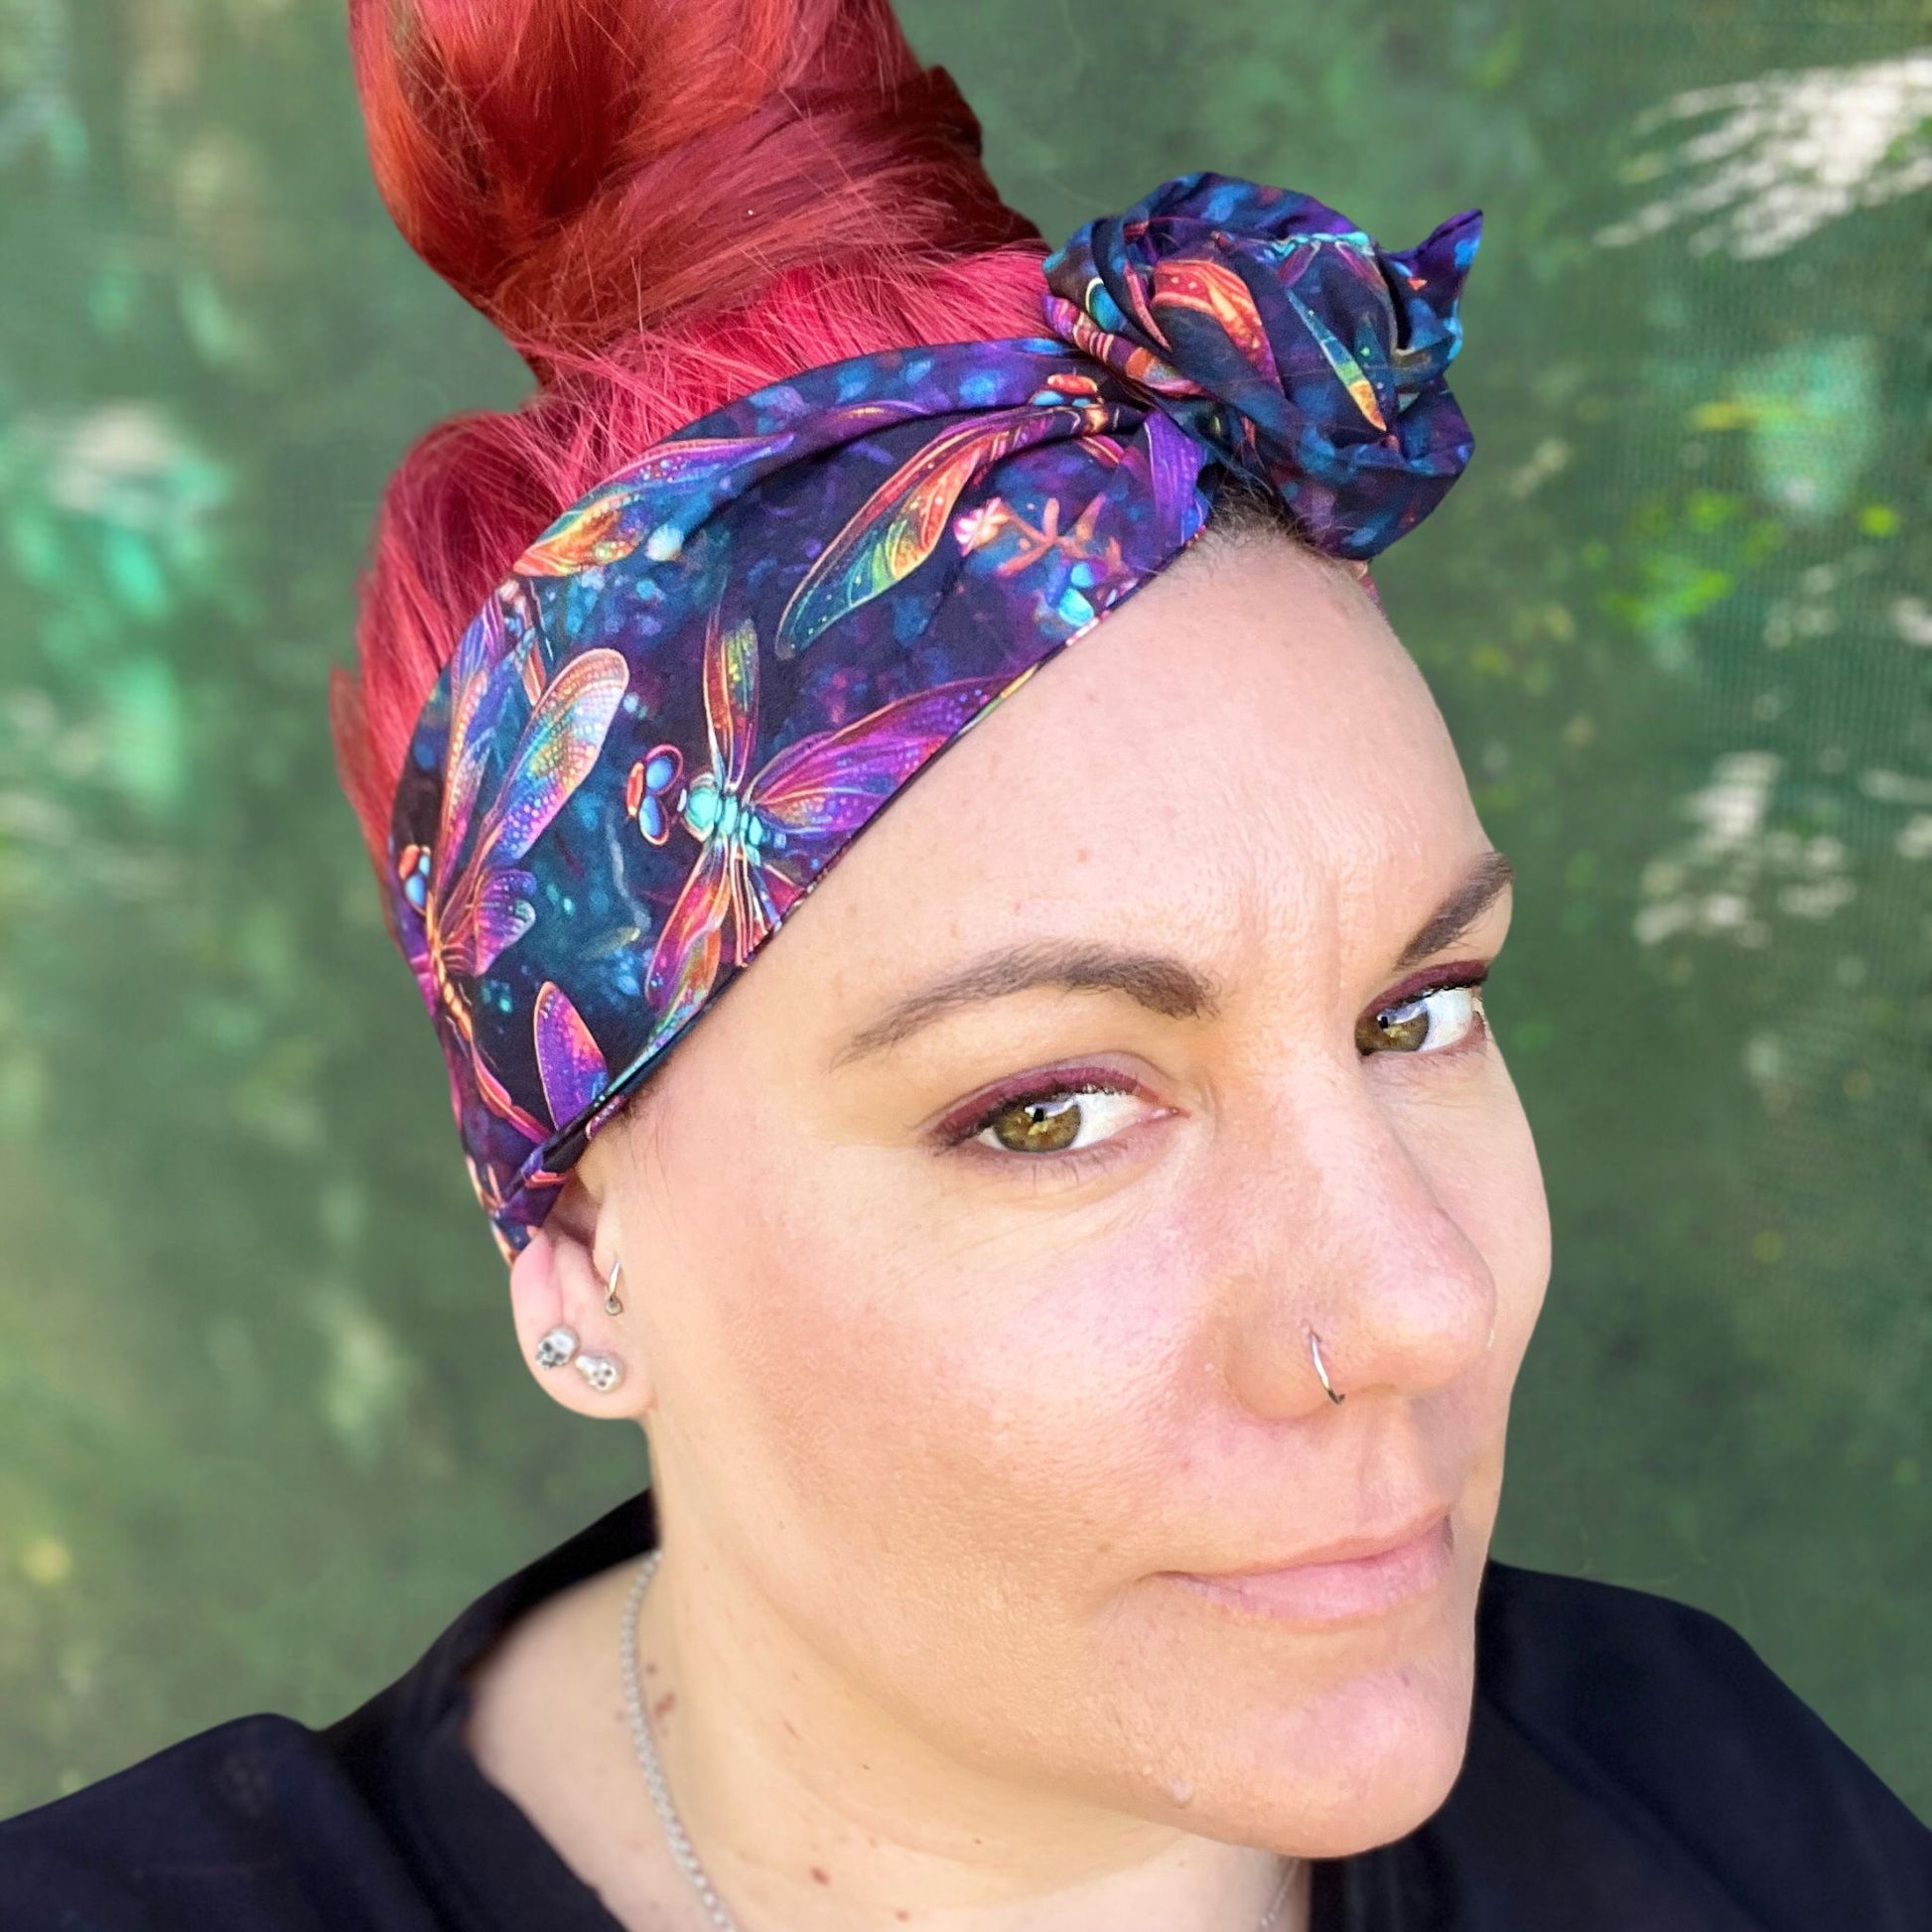 wearing a wire headwrap adorned with a kaleidoscope of colors, the pattern dragonflys. The headwrap is tied stylishly off to the side